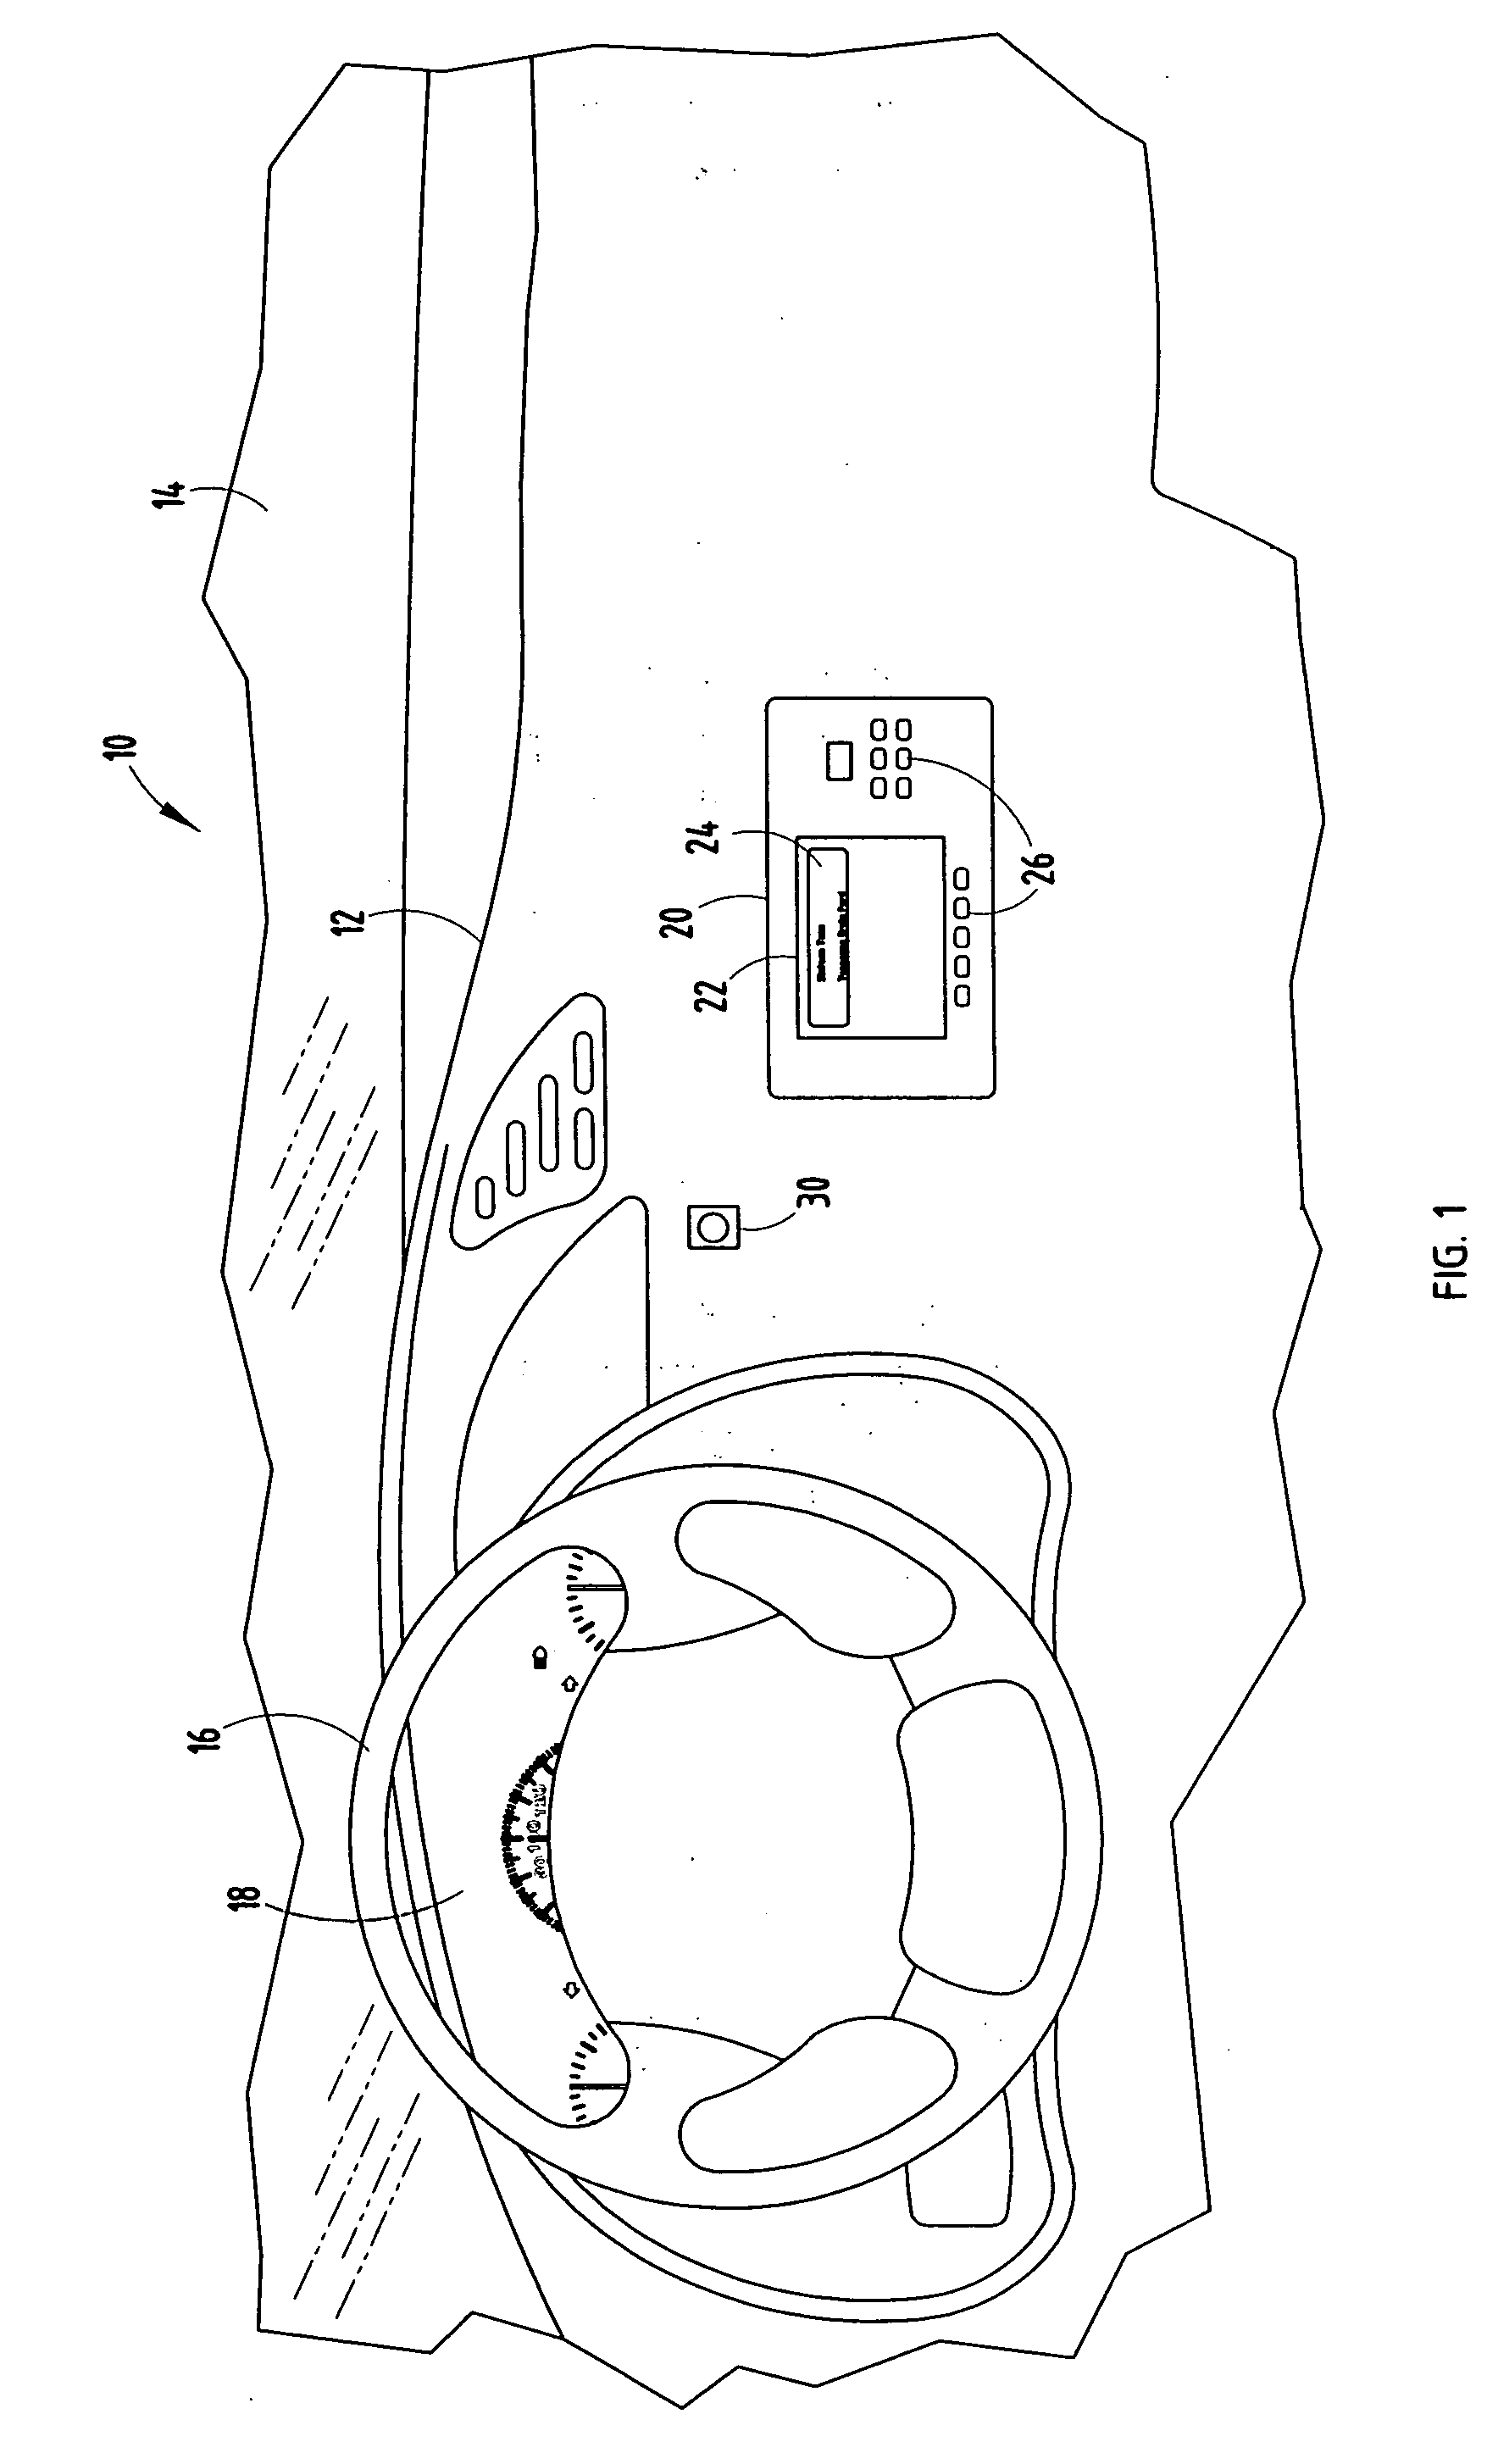 System and method of controlling scrolling text display